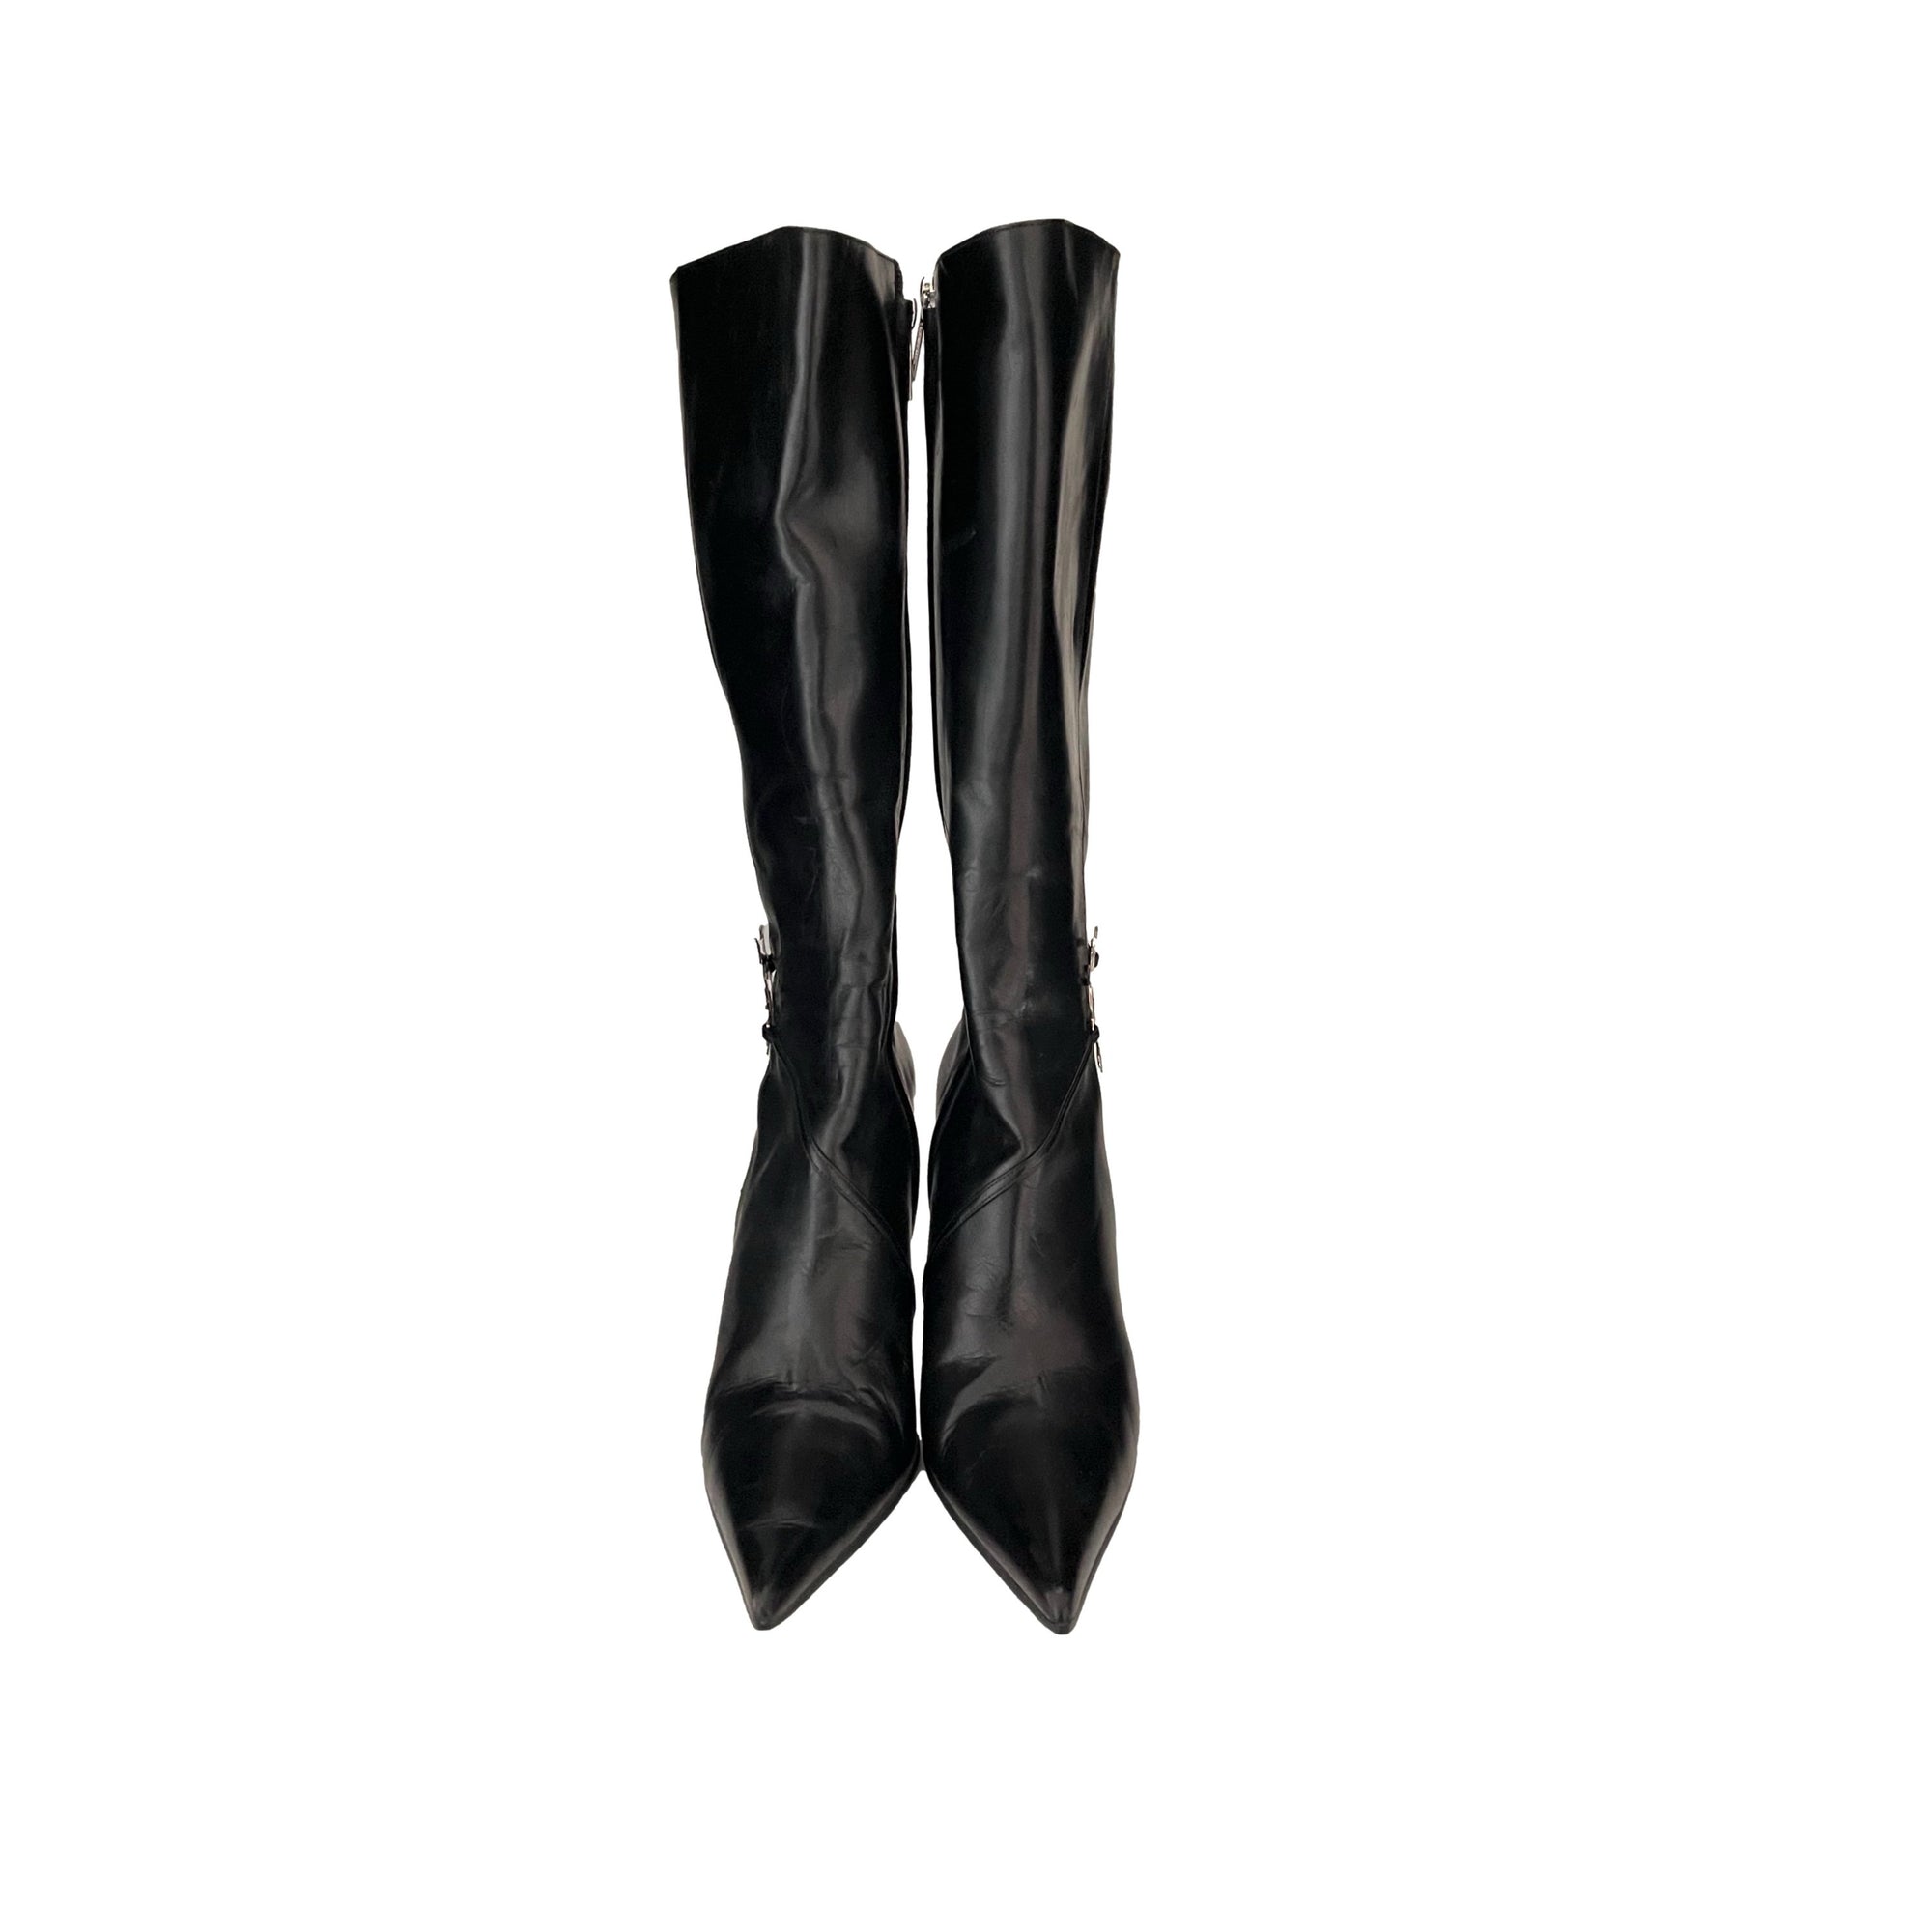 Dior Black Heart Leather Boots - Shoes